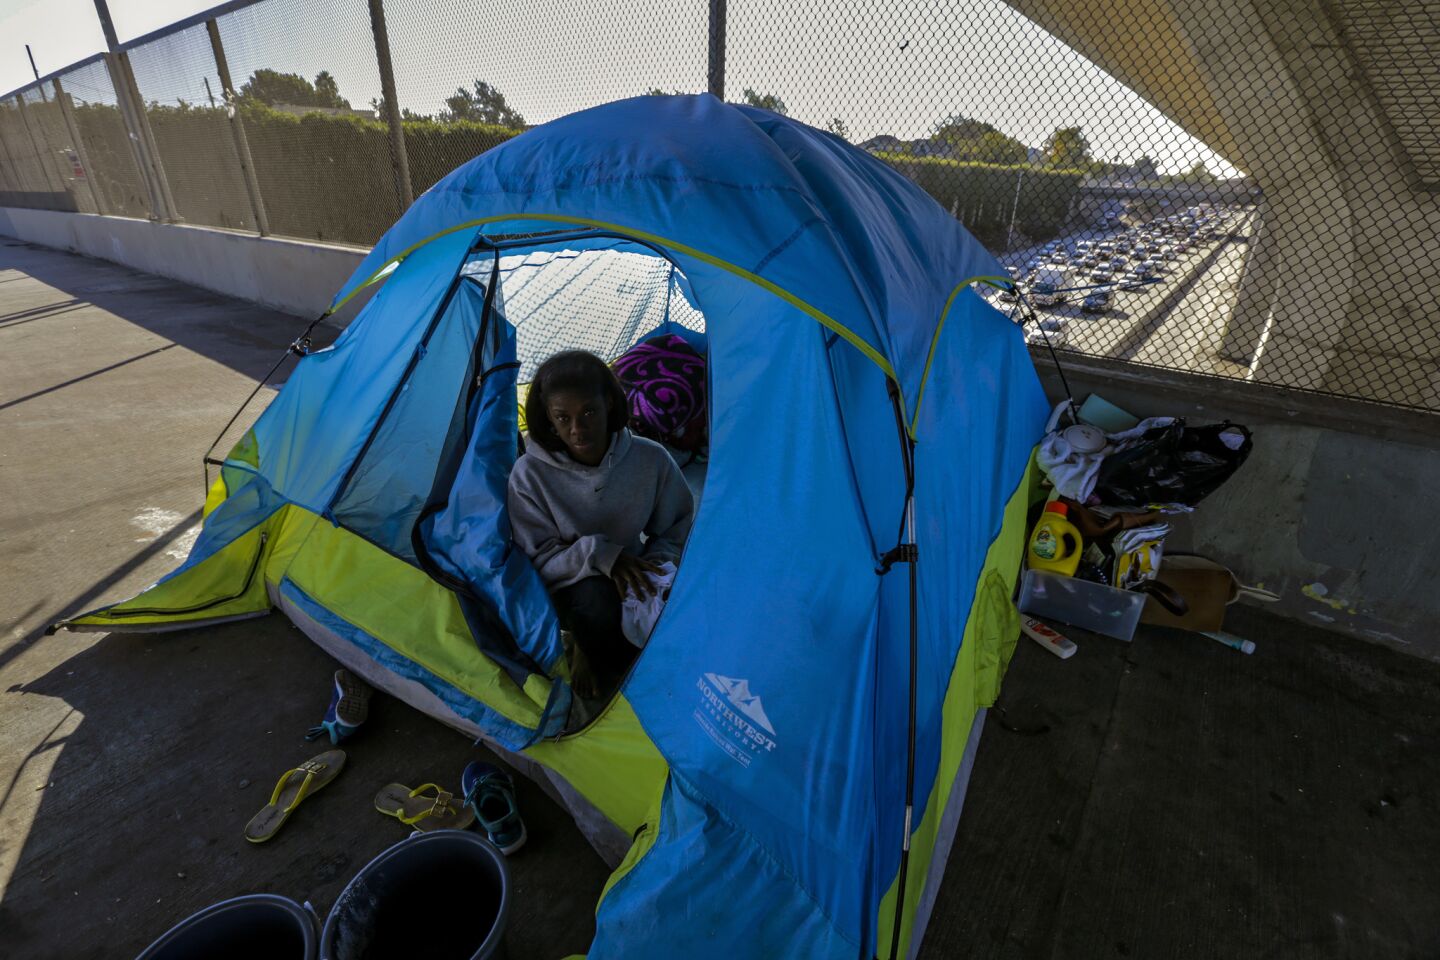 Debra Jackson lives in a tent pitched over 42nd Street bridge over 110 Freeway in Los Angles.